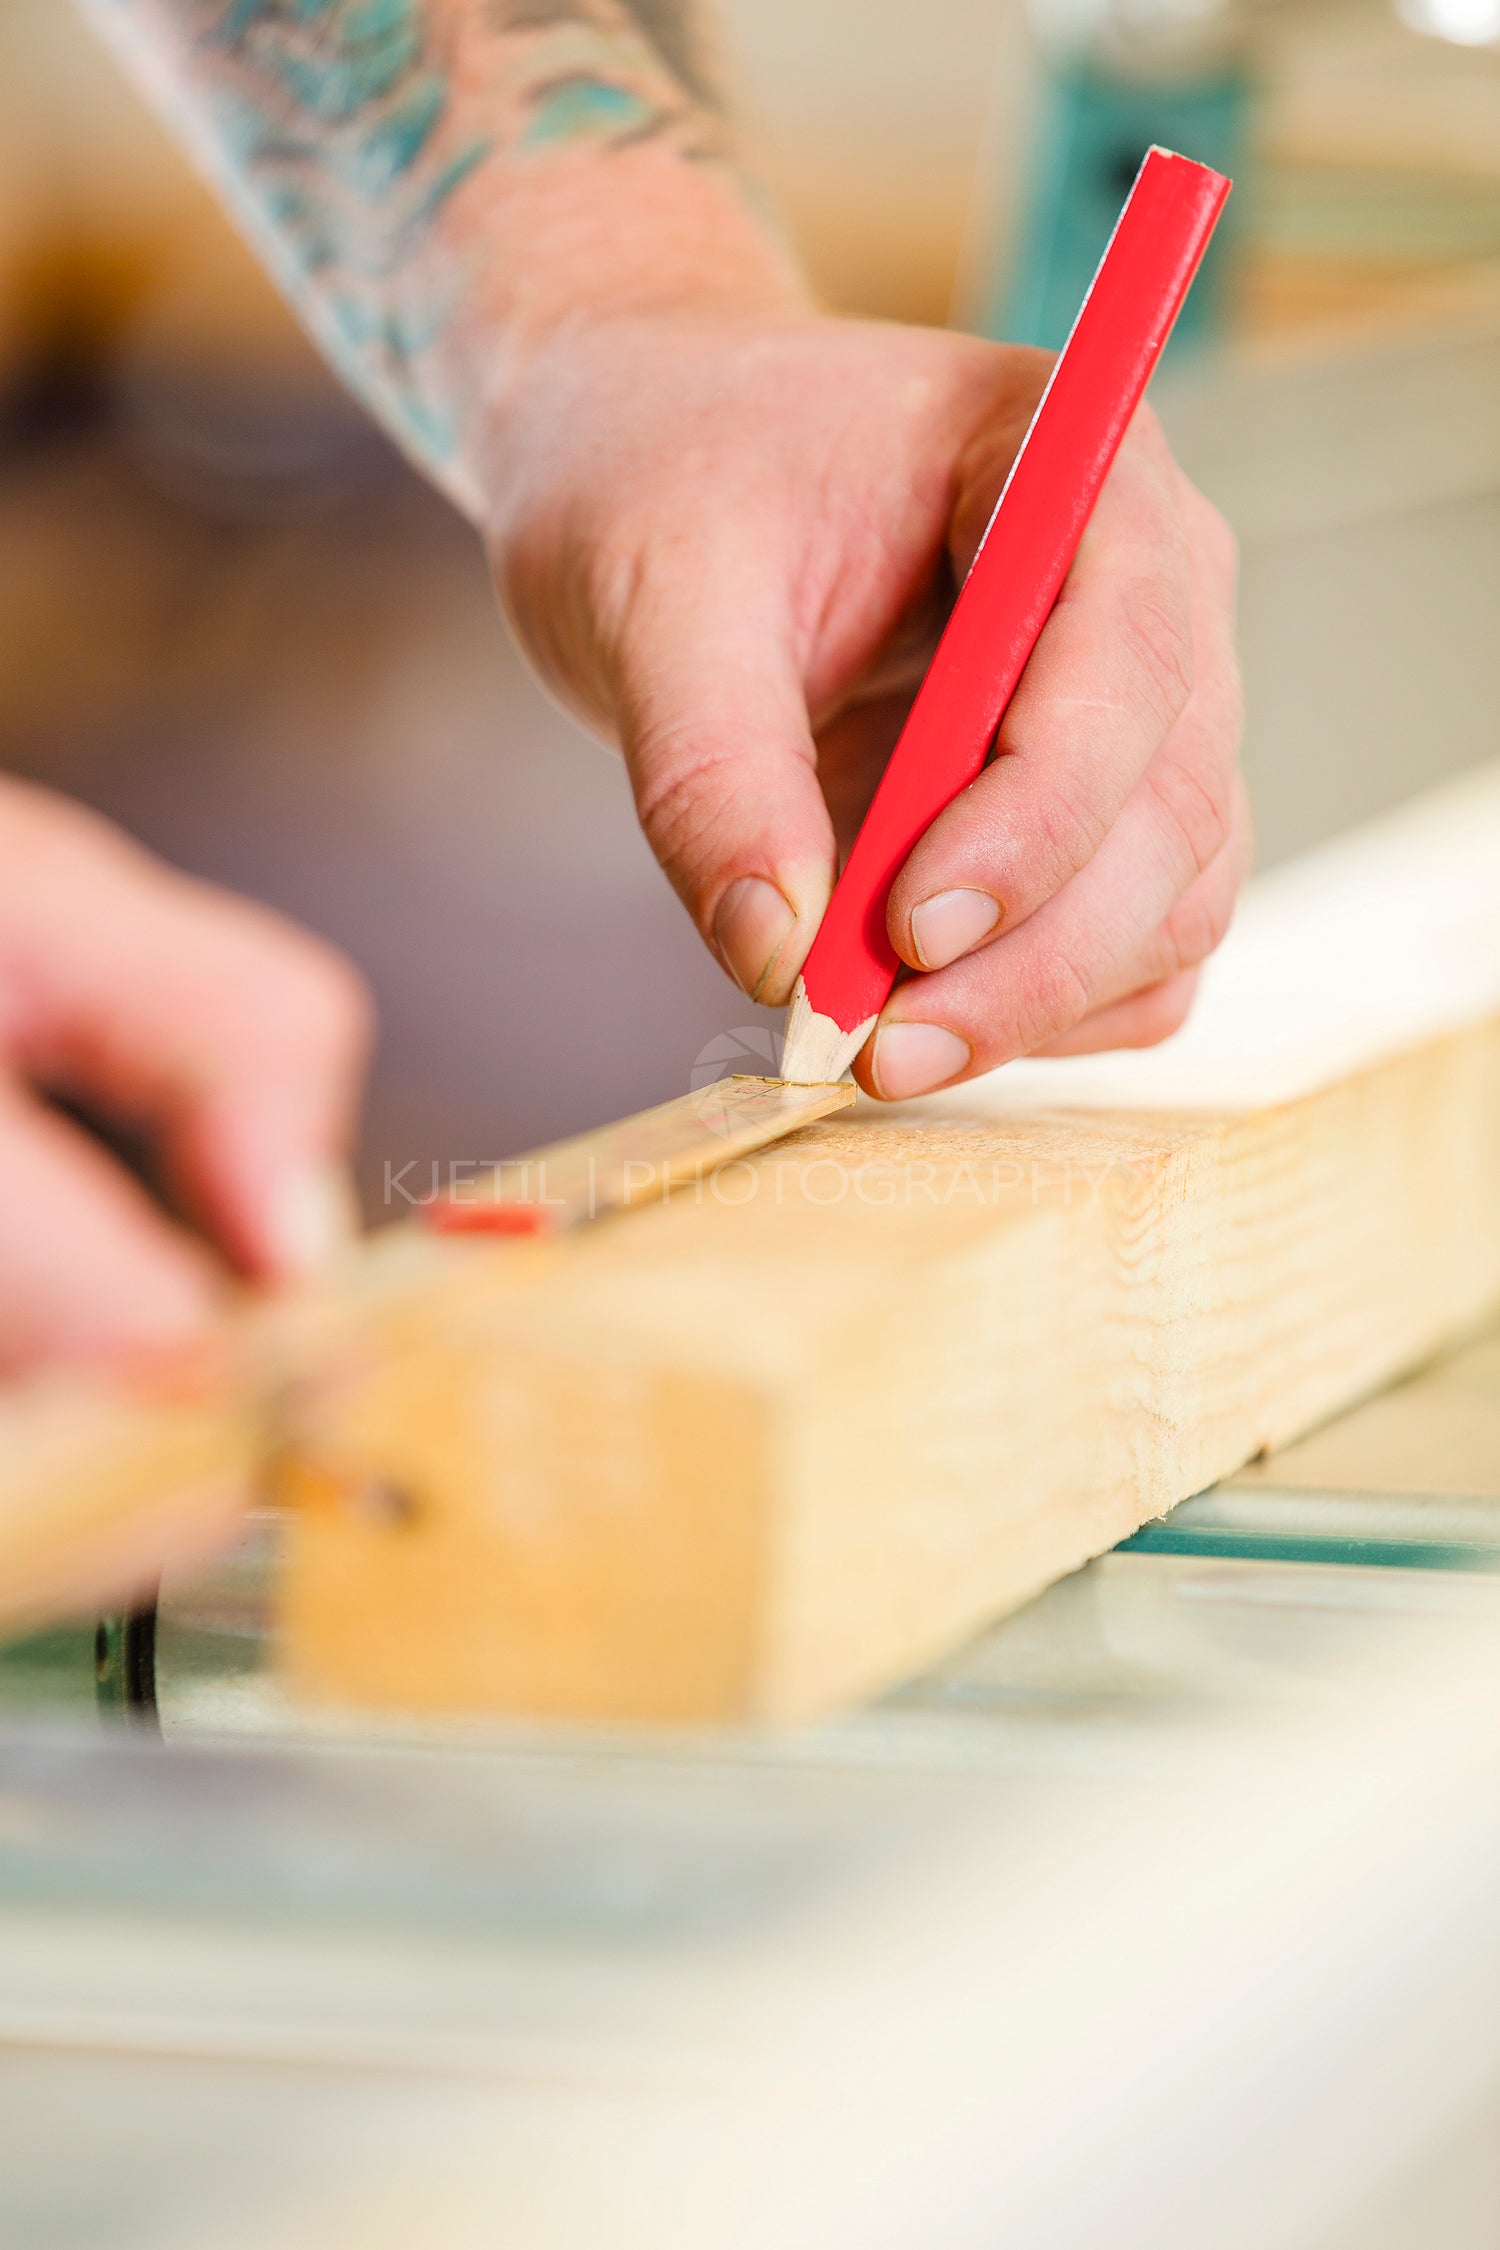 Carpenter measures the length of a wood plank before sawing